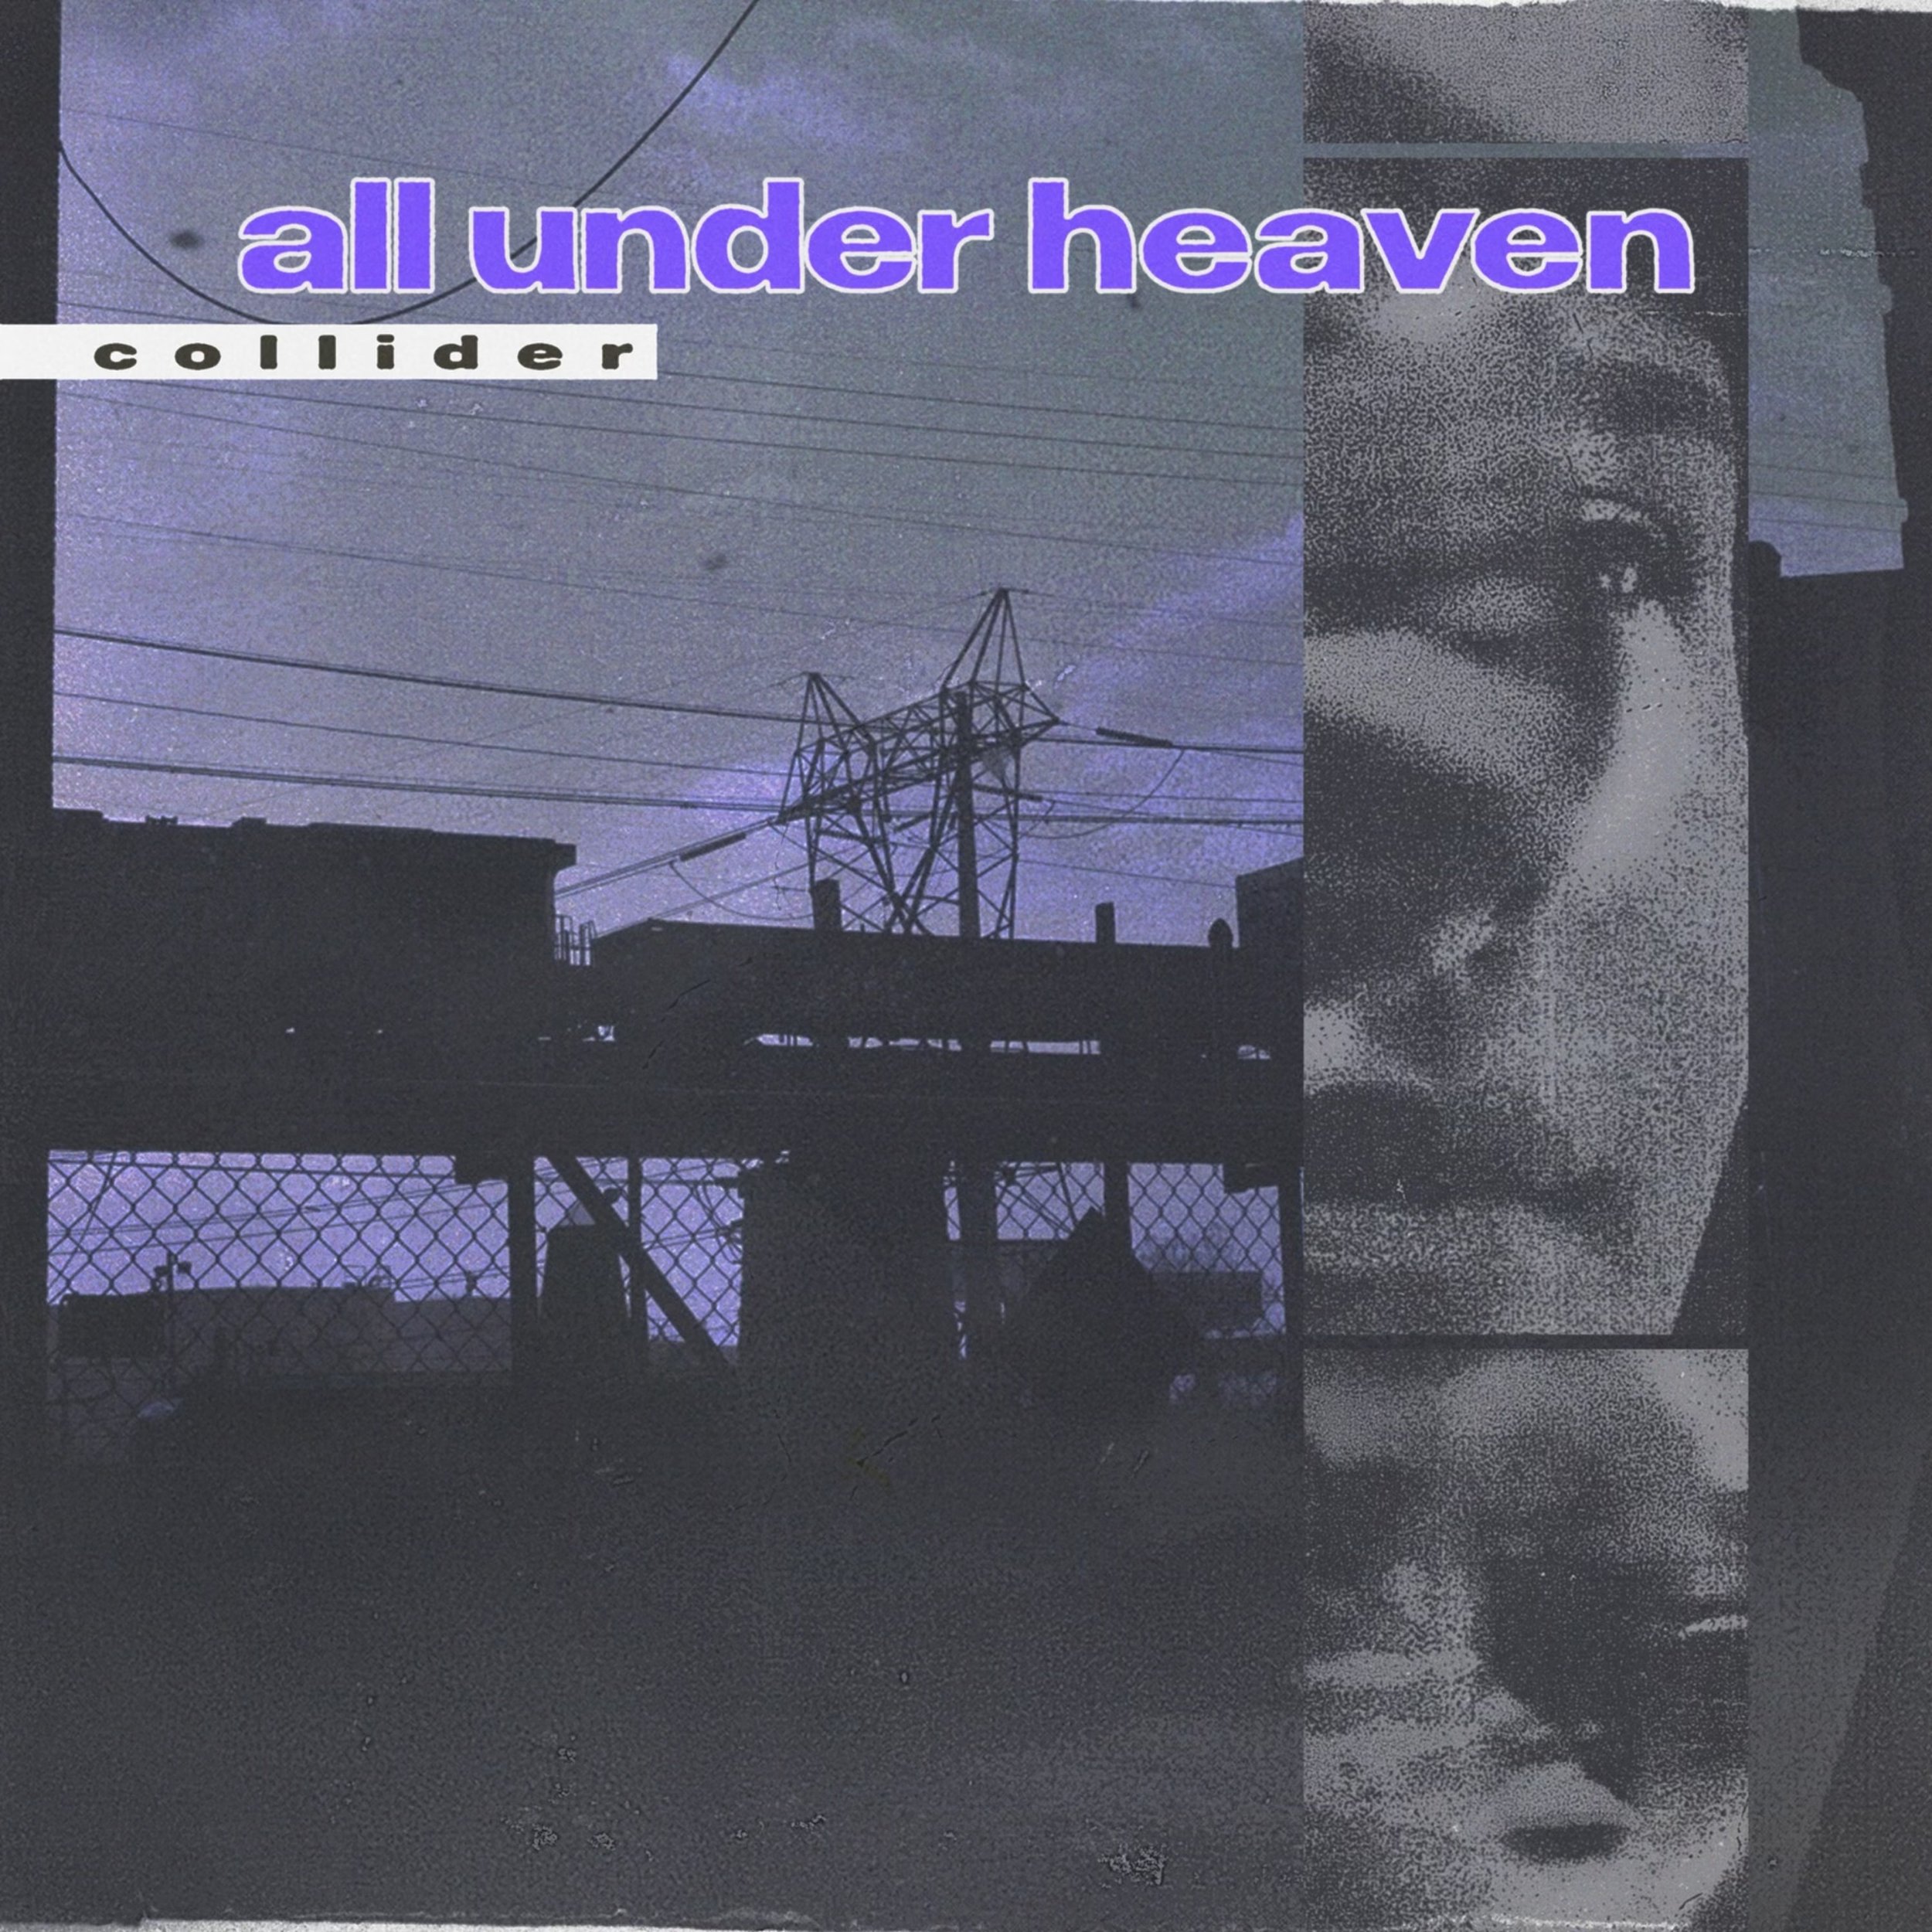 All Under Heaven - Collider - Cover.jpg